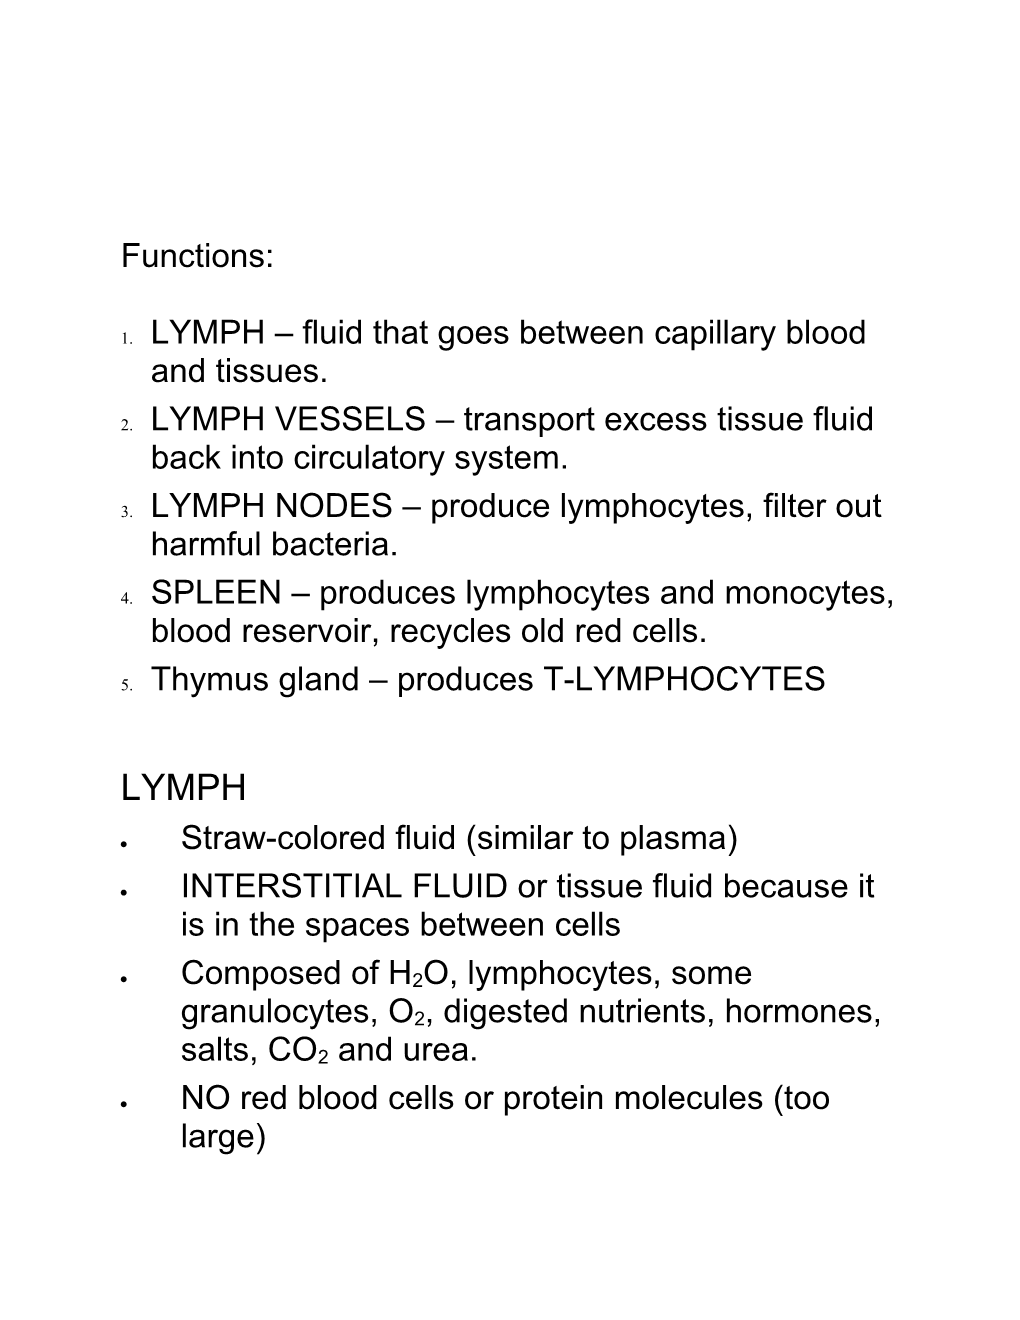 1. LYMPH Fluid That Goes Between Capillary Blood and Tissues